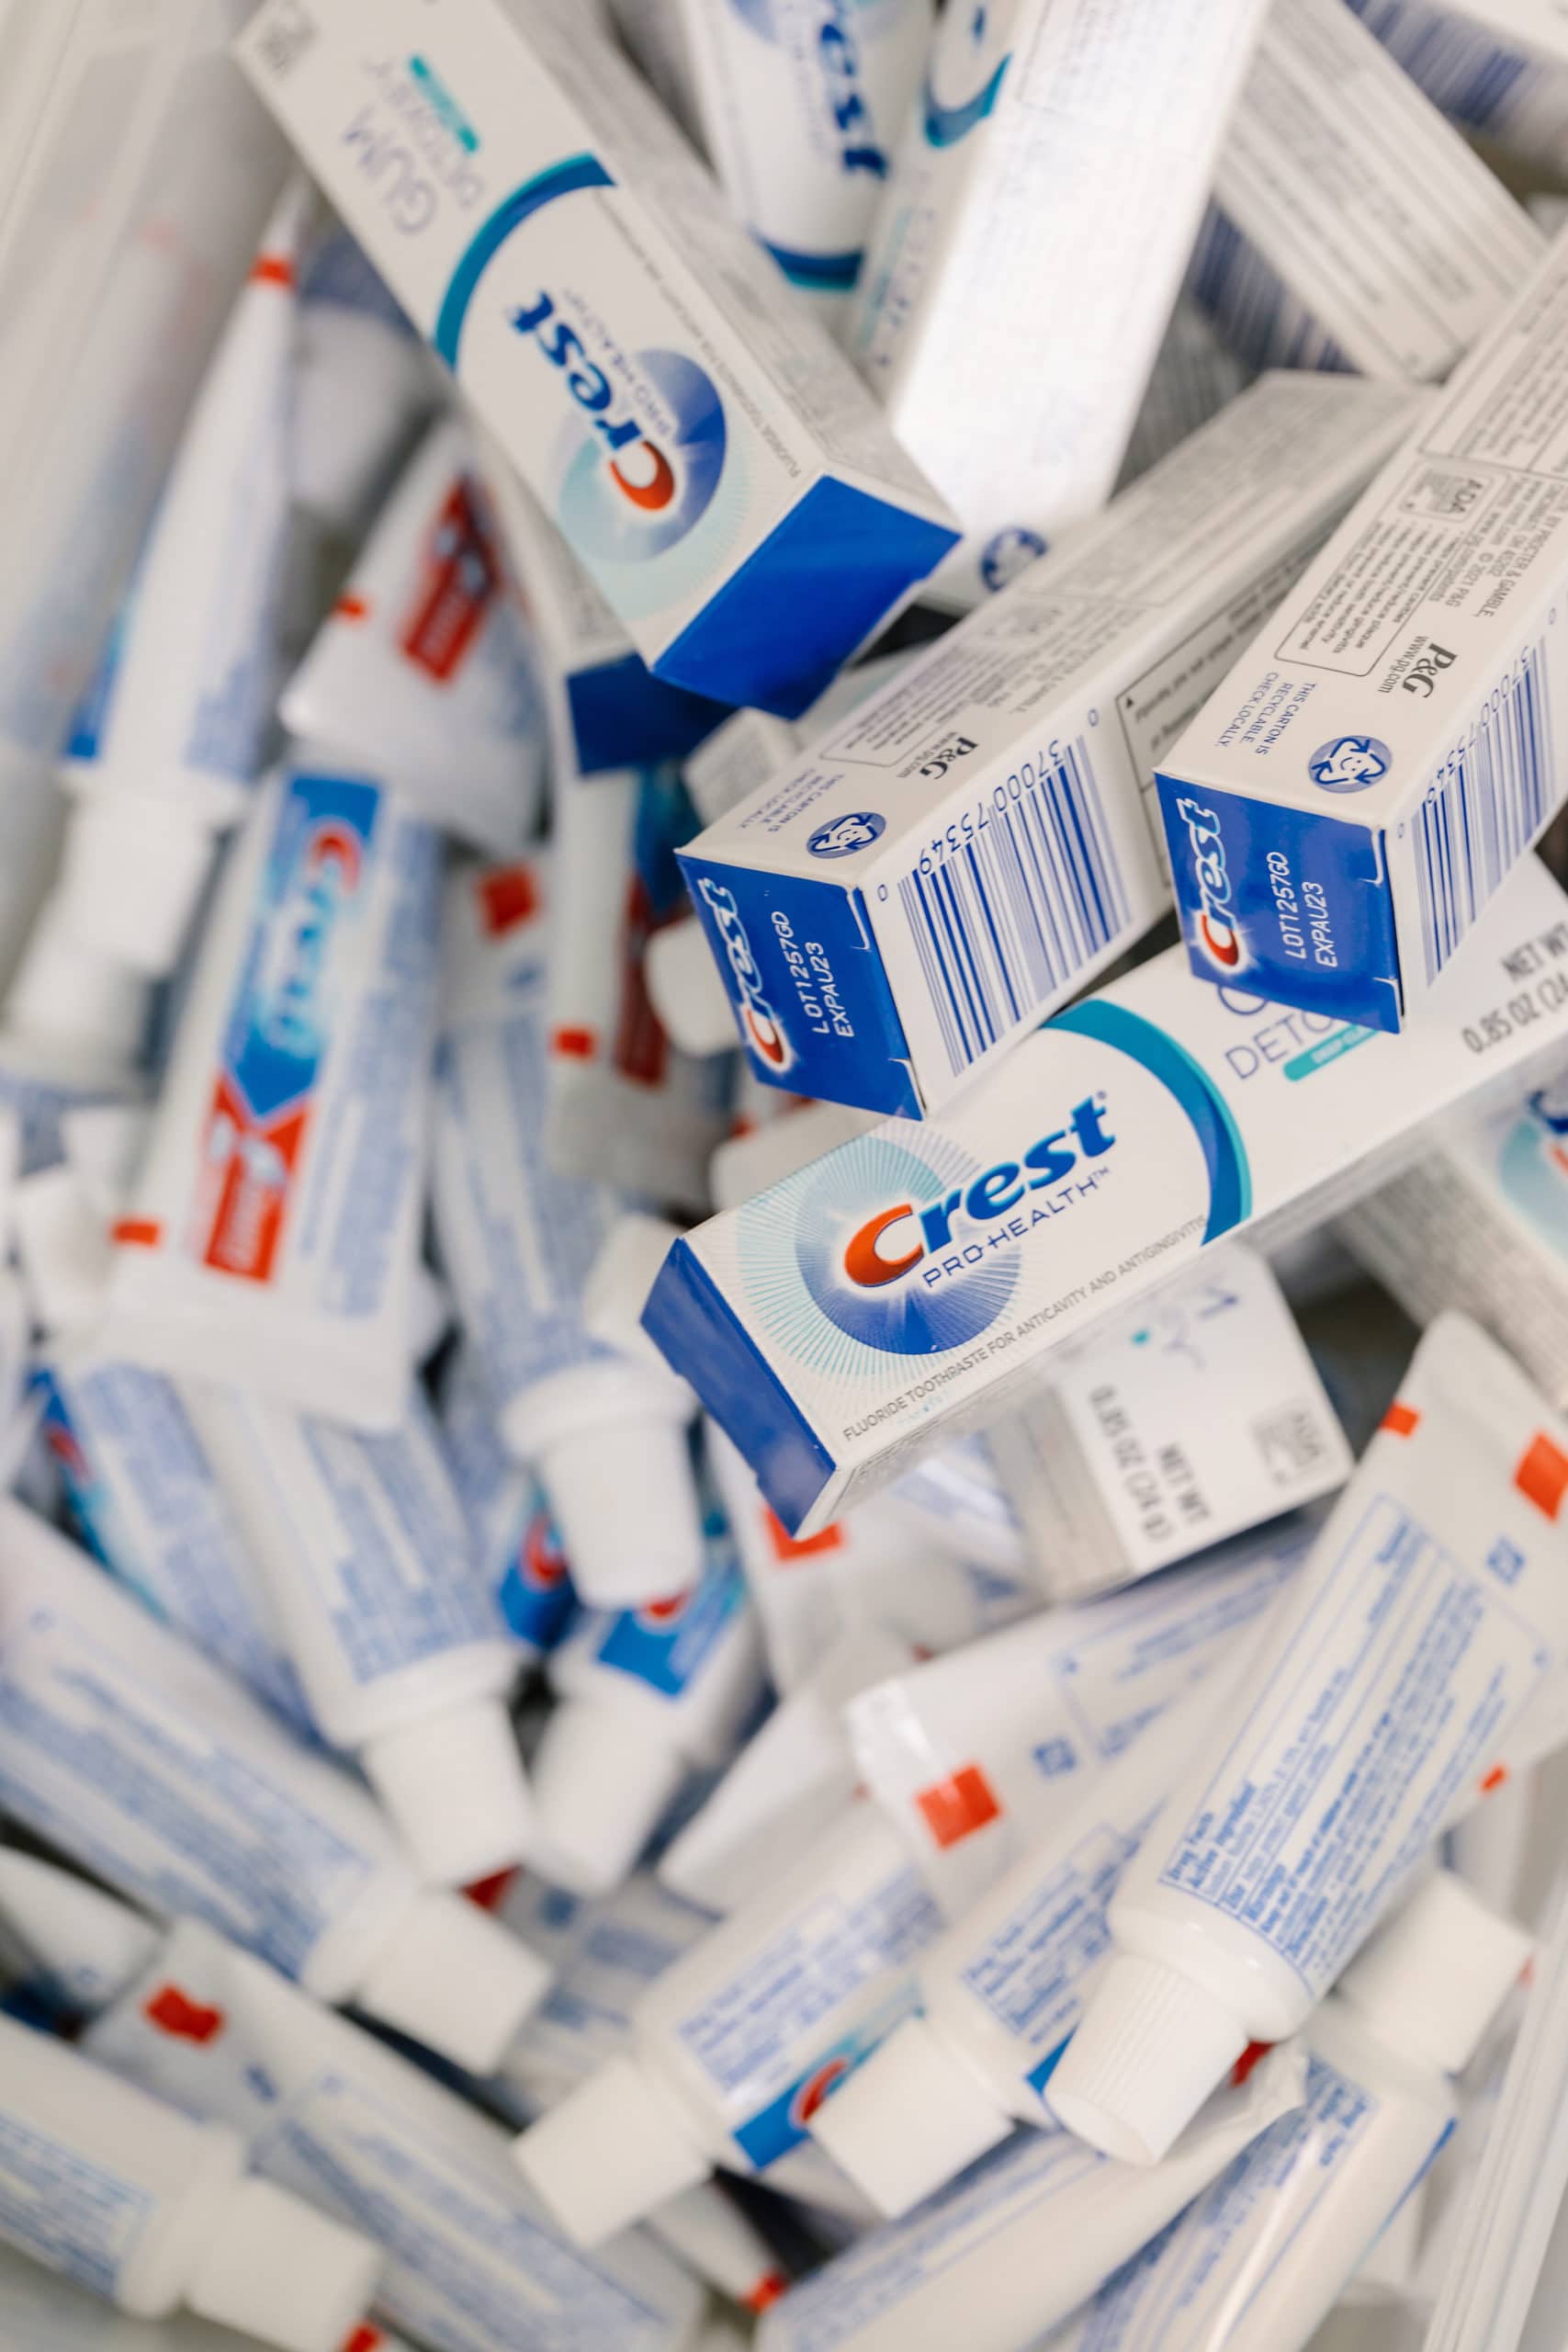 A large bin full of travel size Crest Pro Health toothpastes.